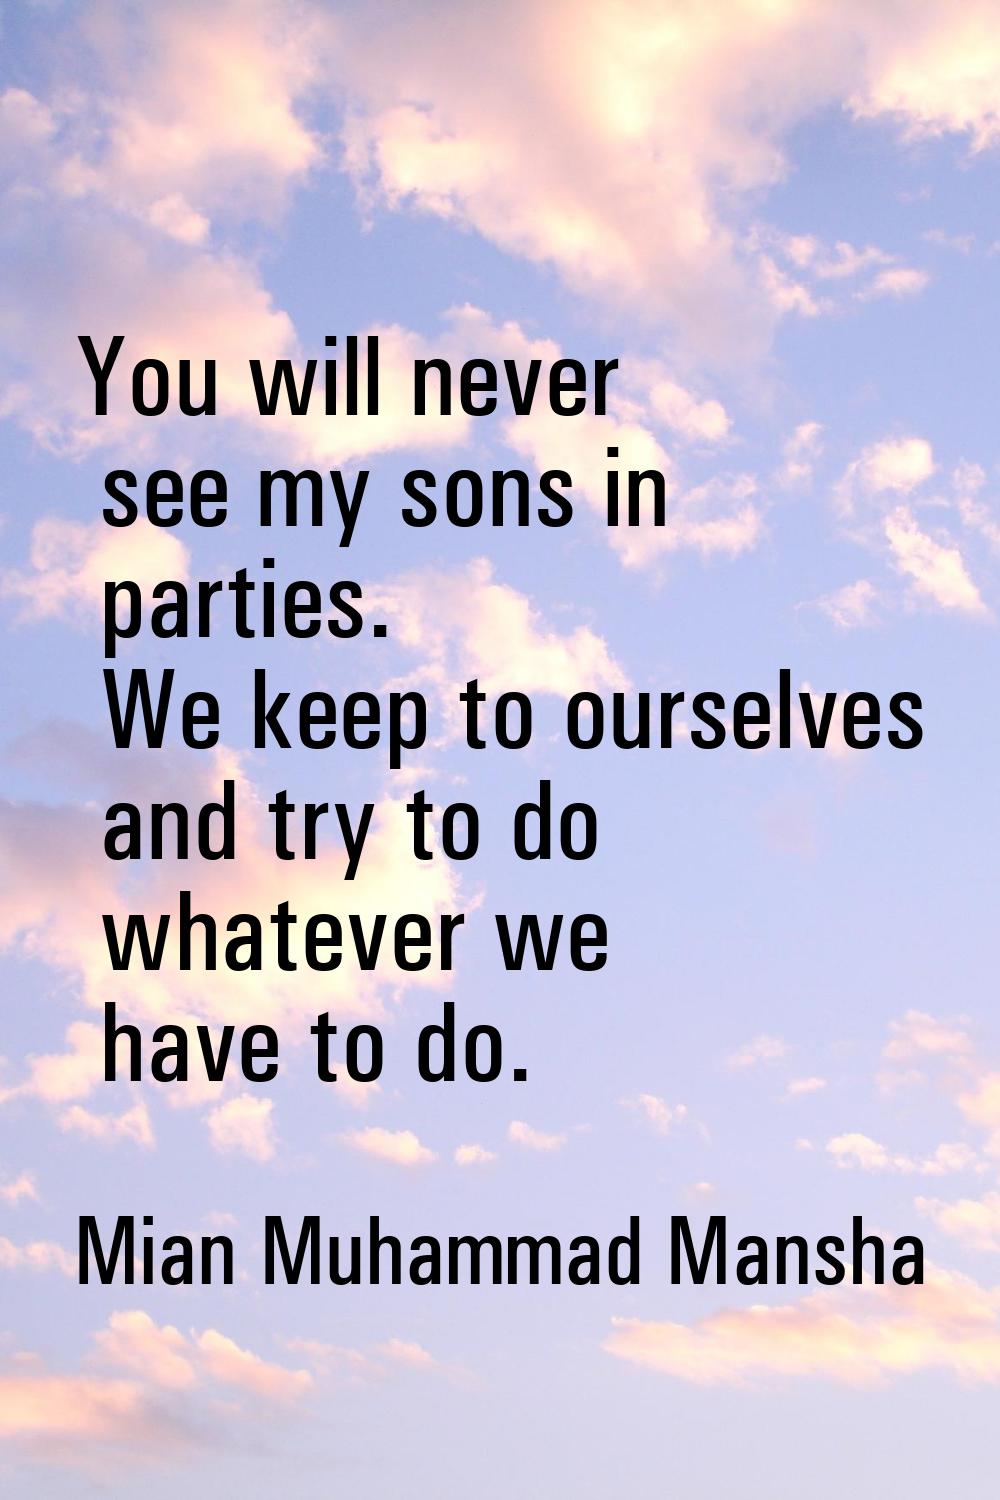 You will never see my sons in parties. We keep to ourselves and try to do whatever we have to do.